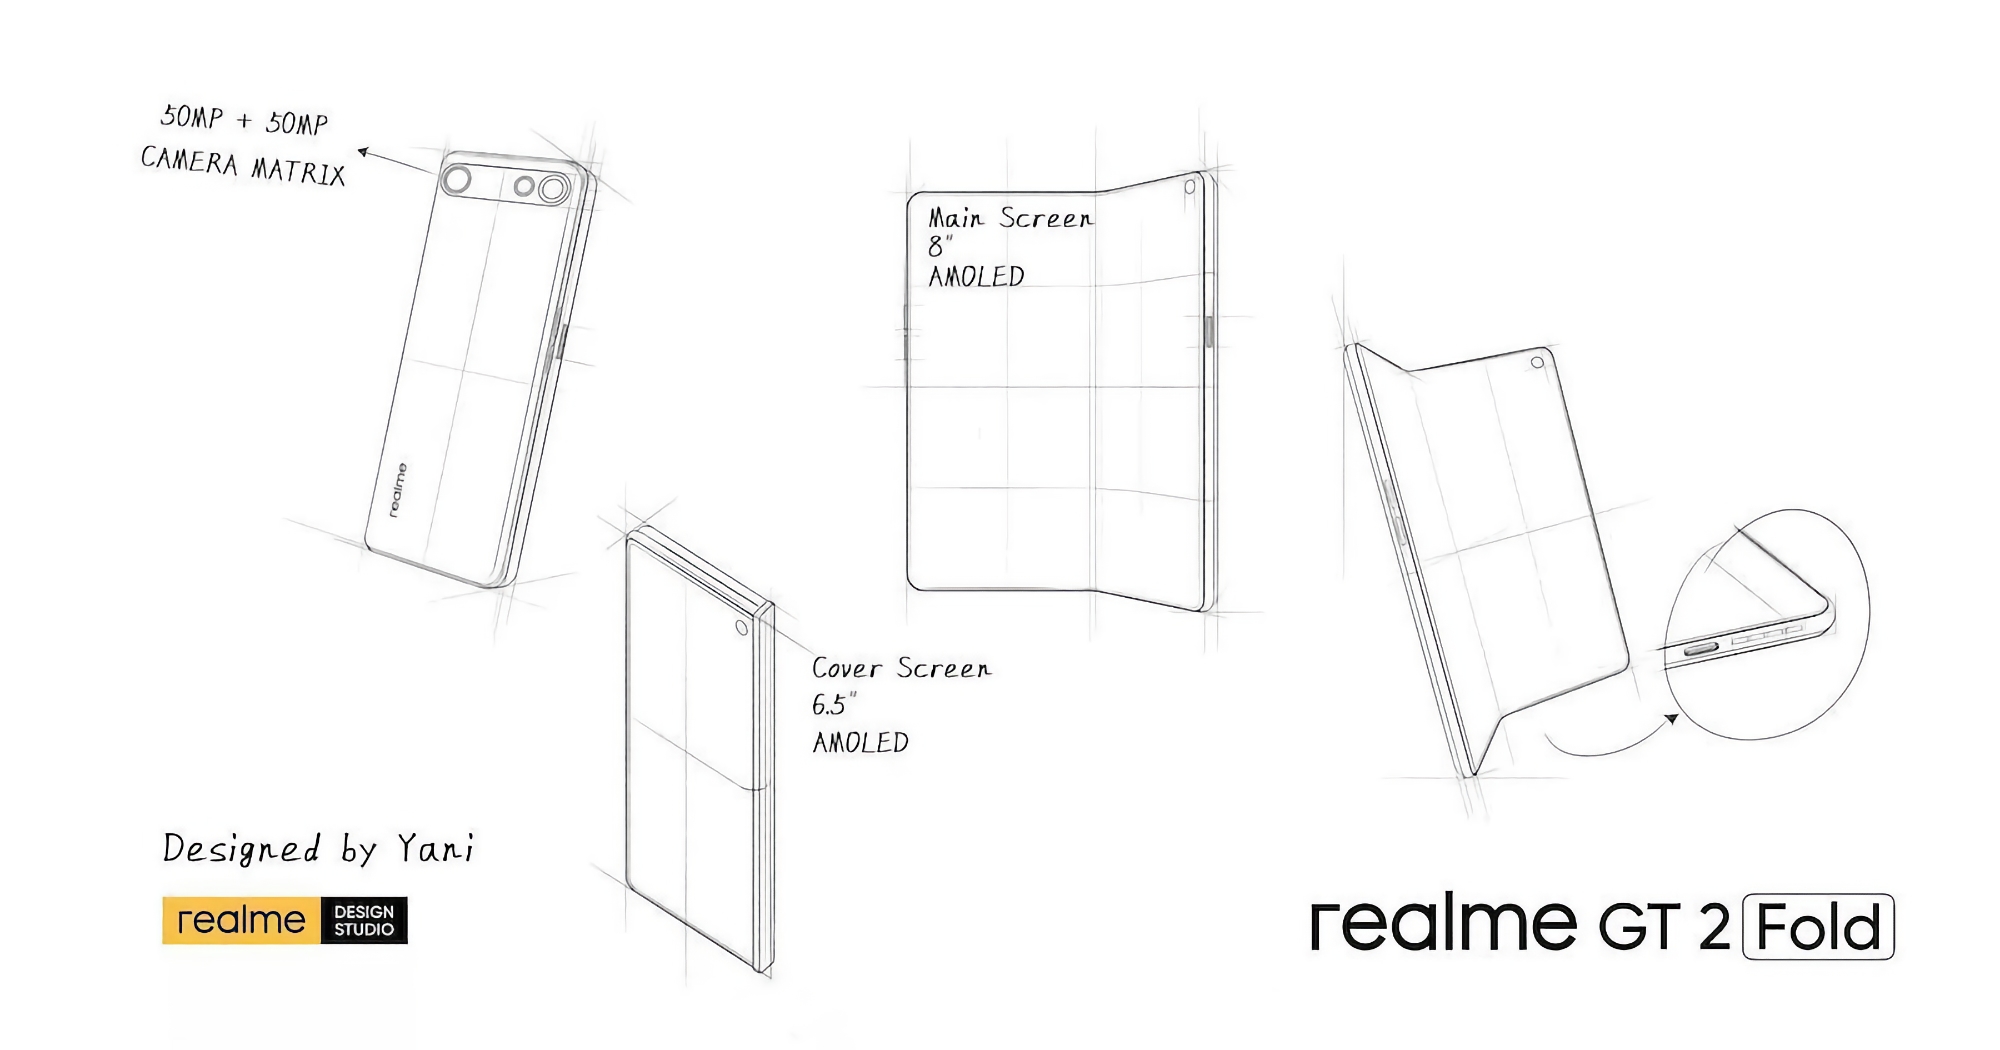 Realme will enter the foldable smartphone market in 2022